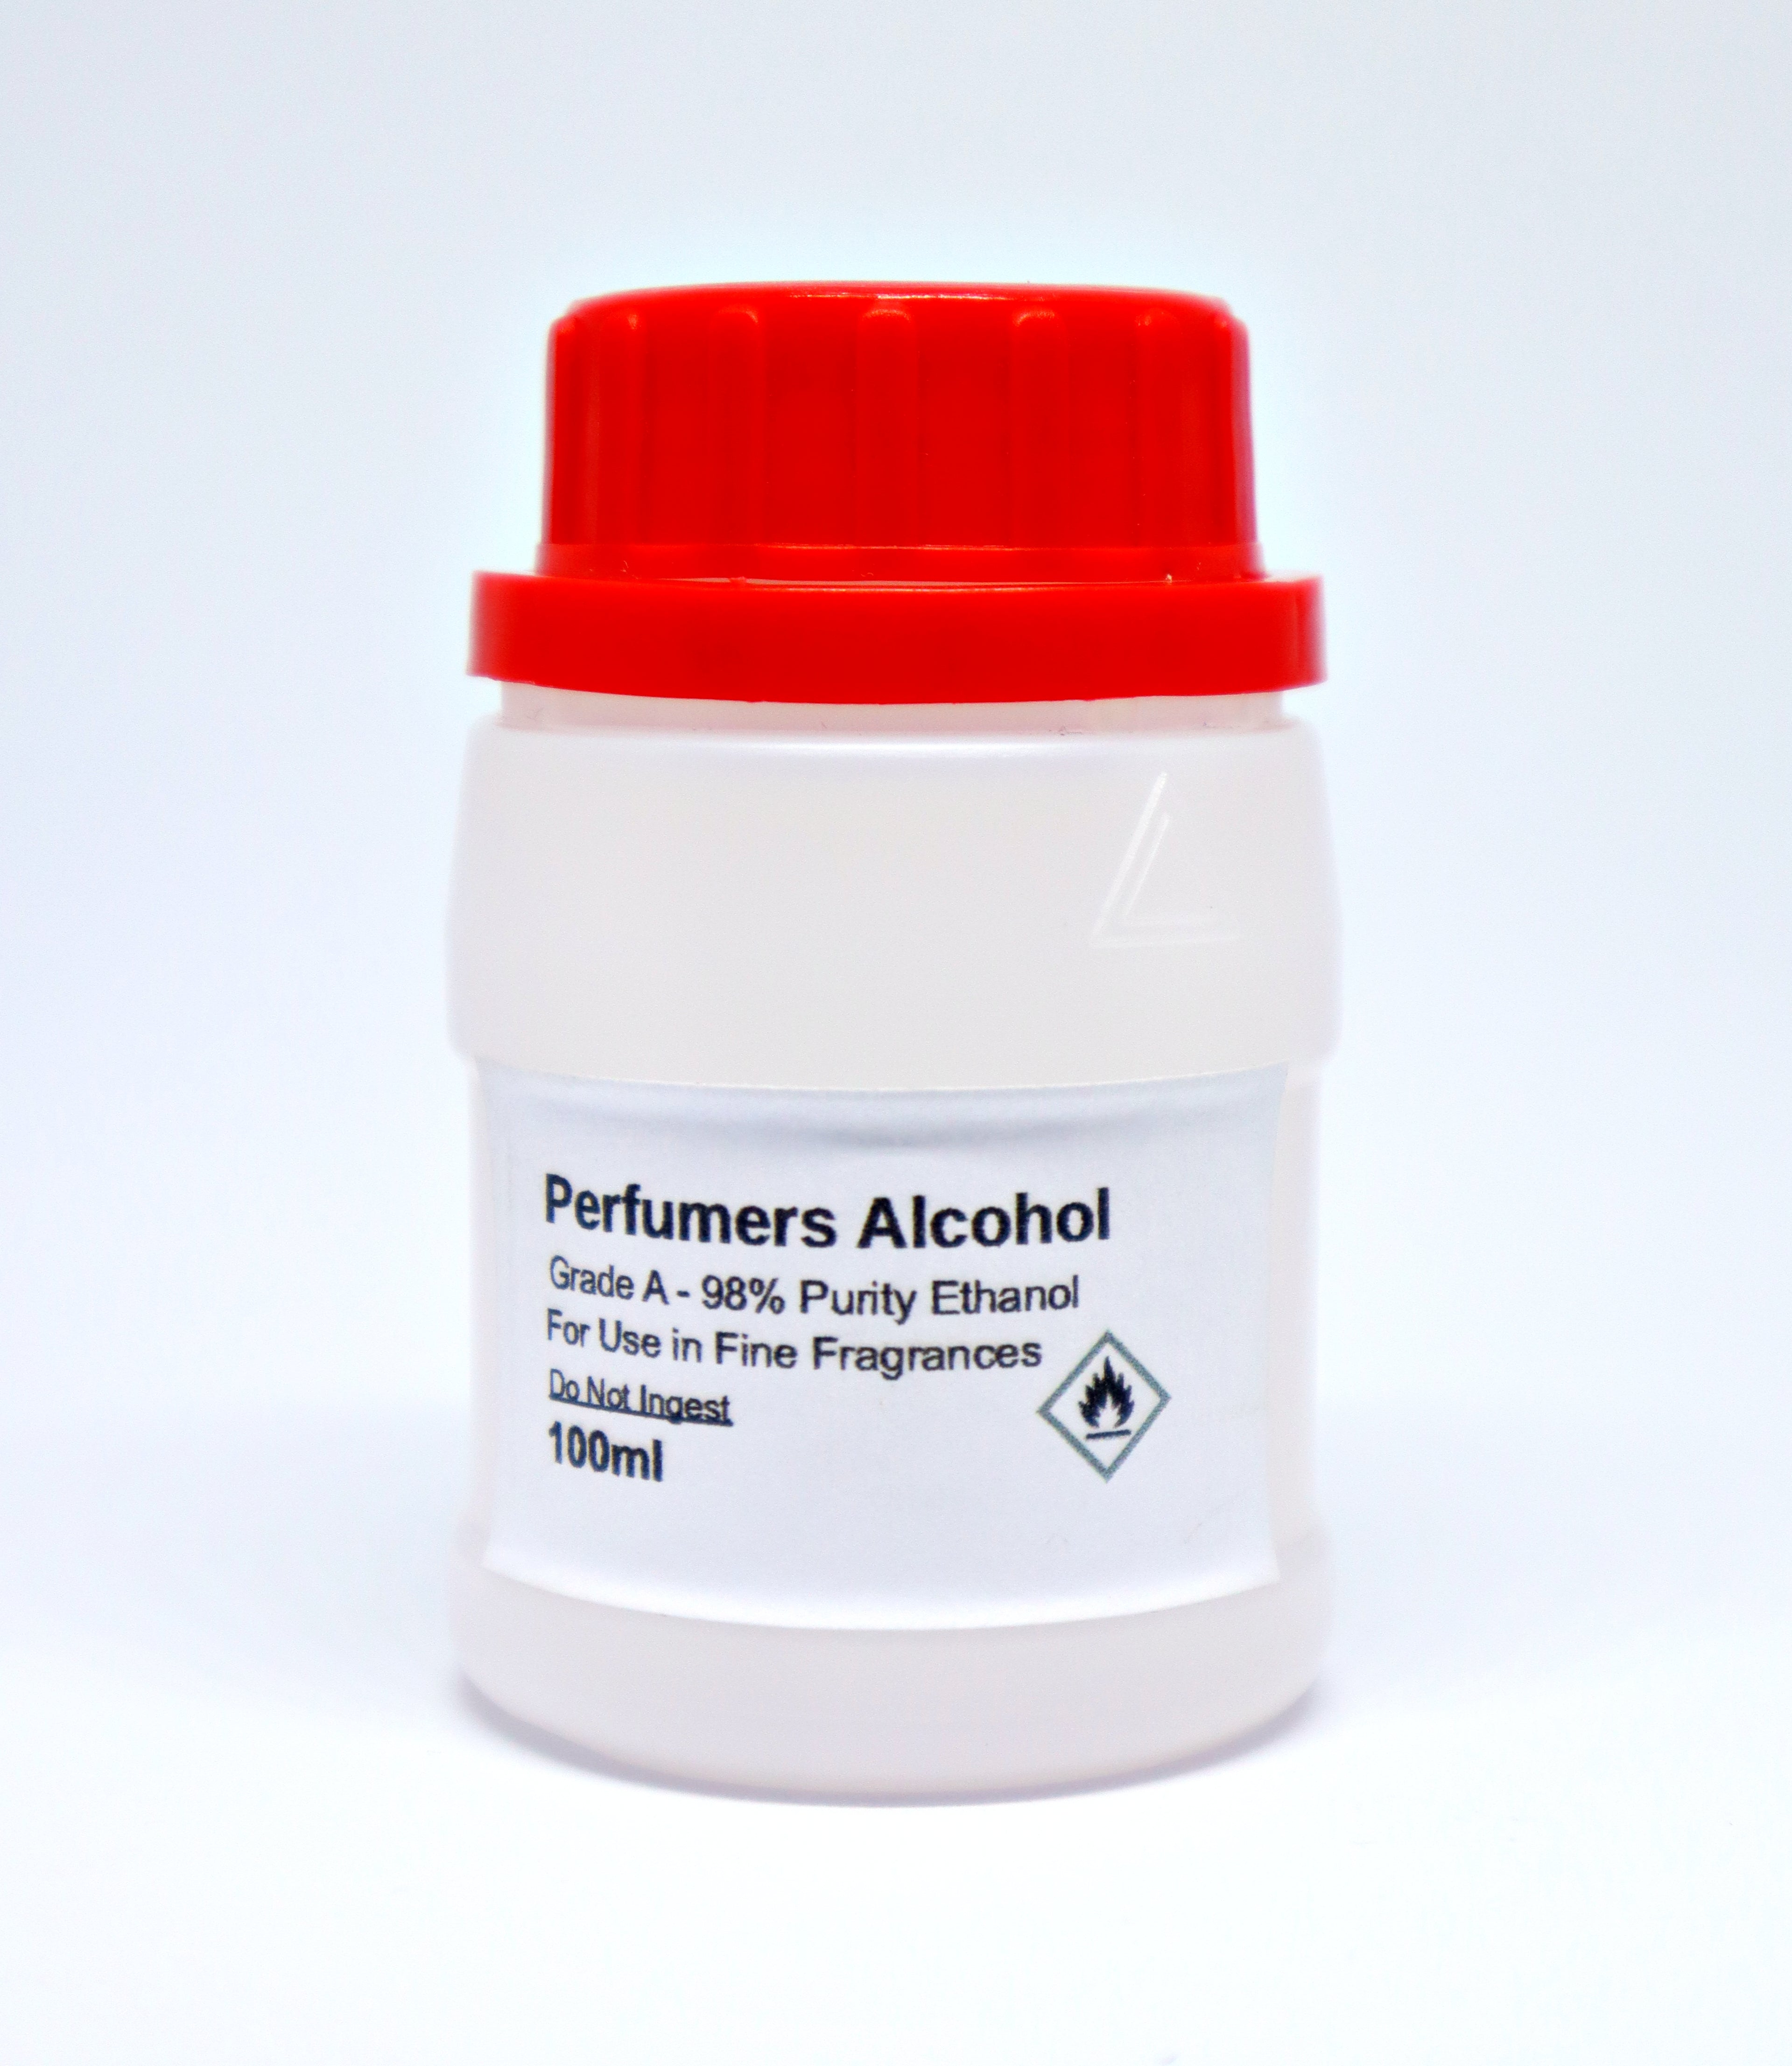 Perfumers Alcohol - ScentScientists